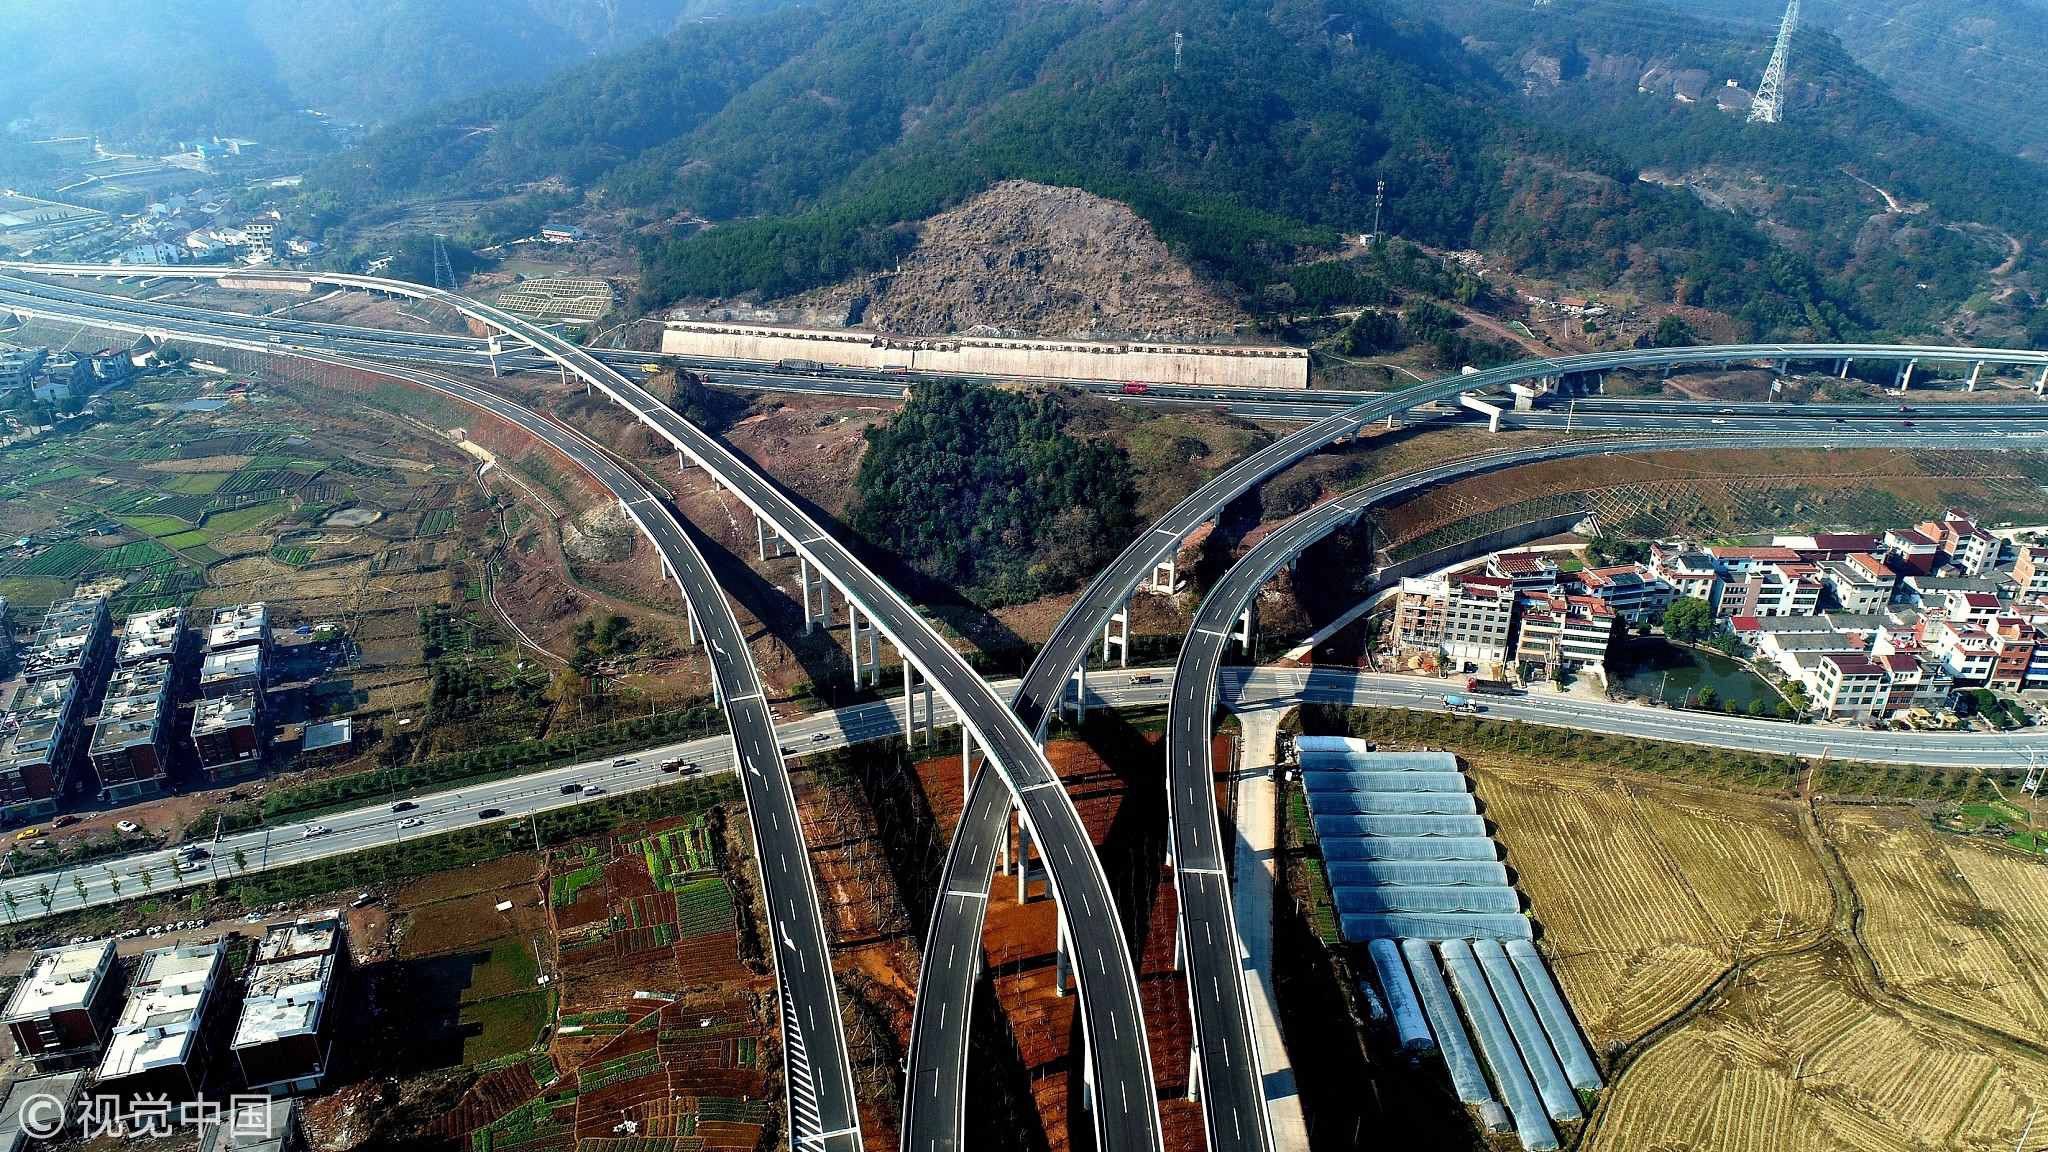 China starts work on world's first 'super highway' that can charge electric cars as they drive. by Shanghaiist.com